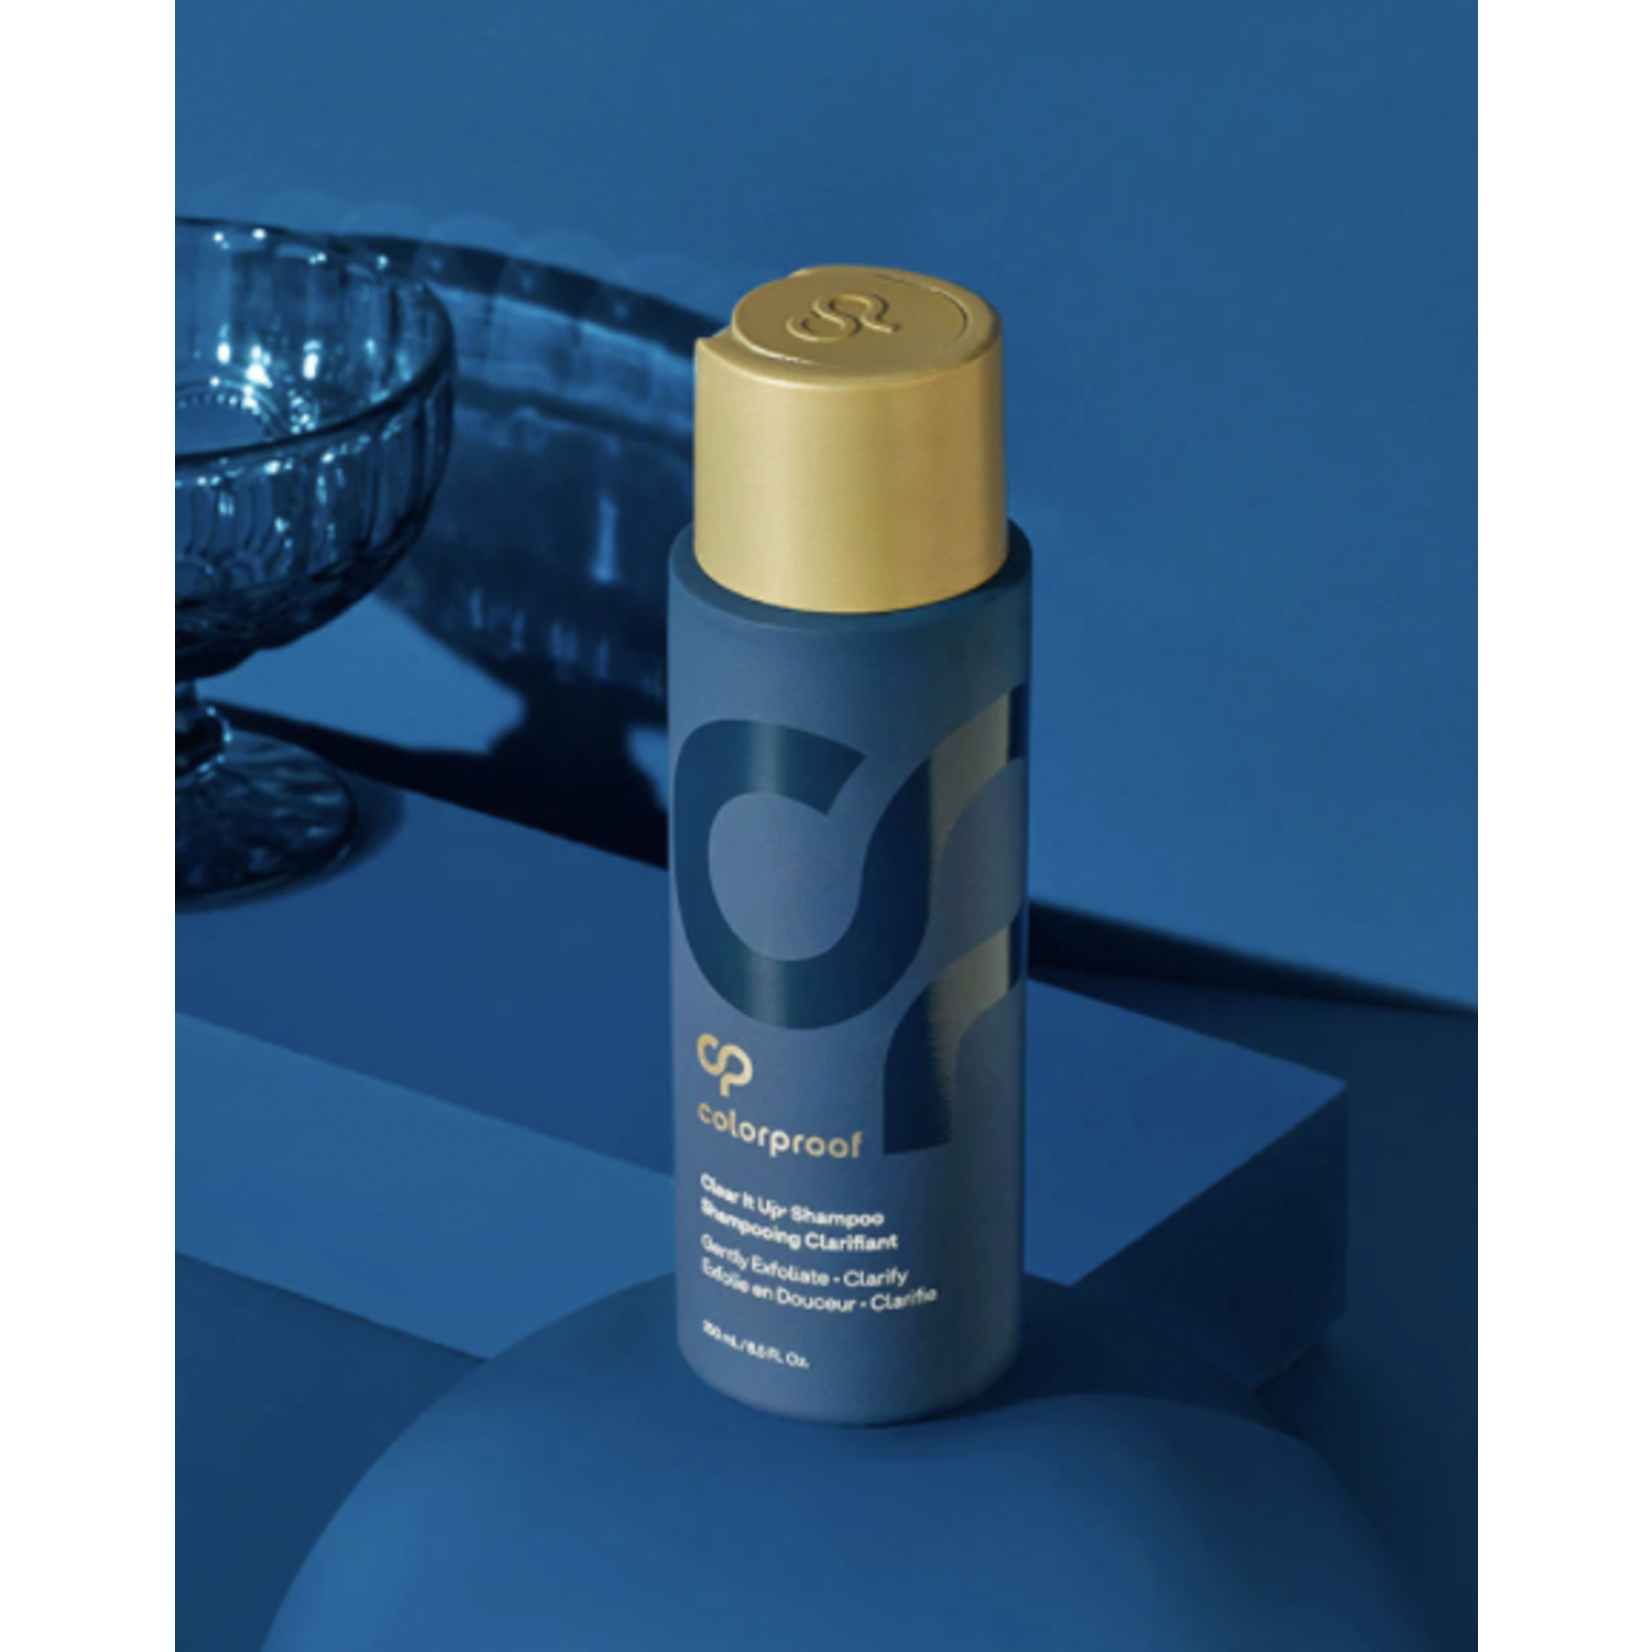 colorproof colorproof Clear It Up® Shampoo